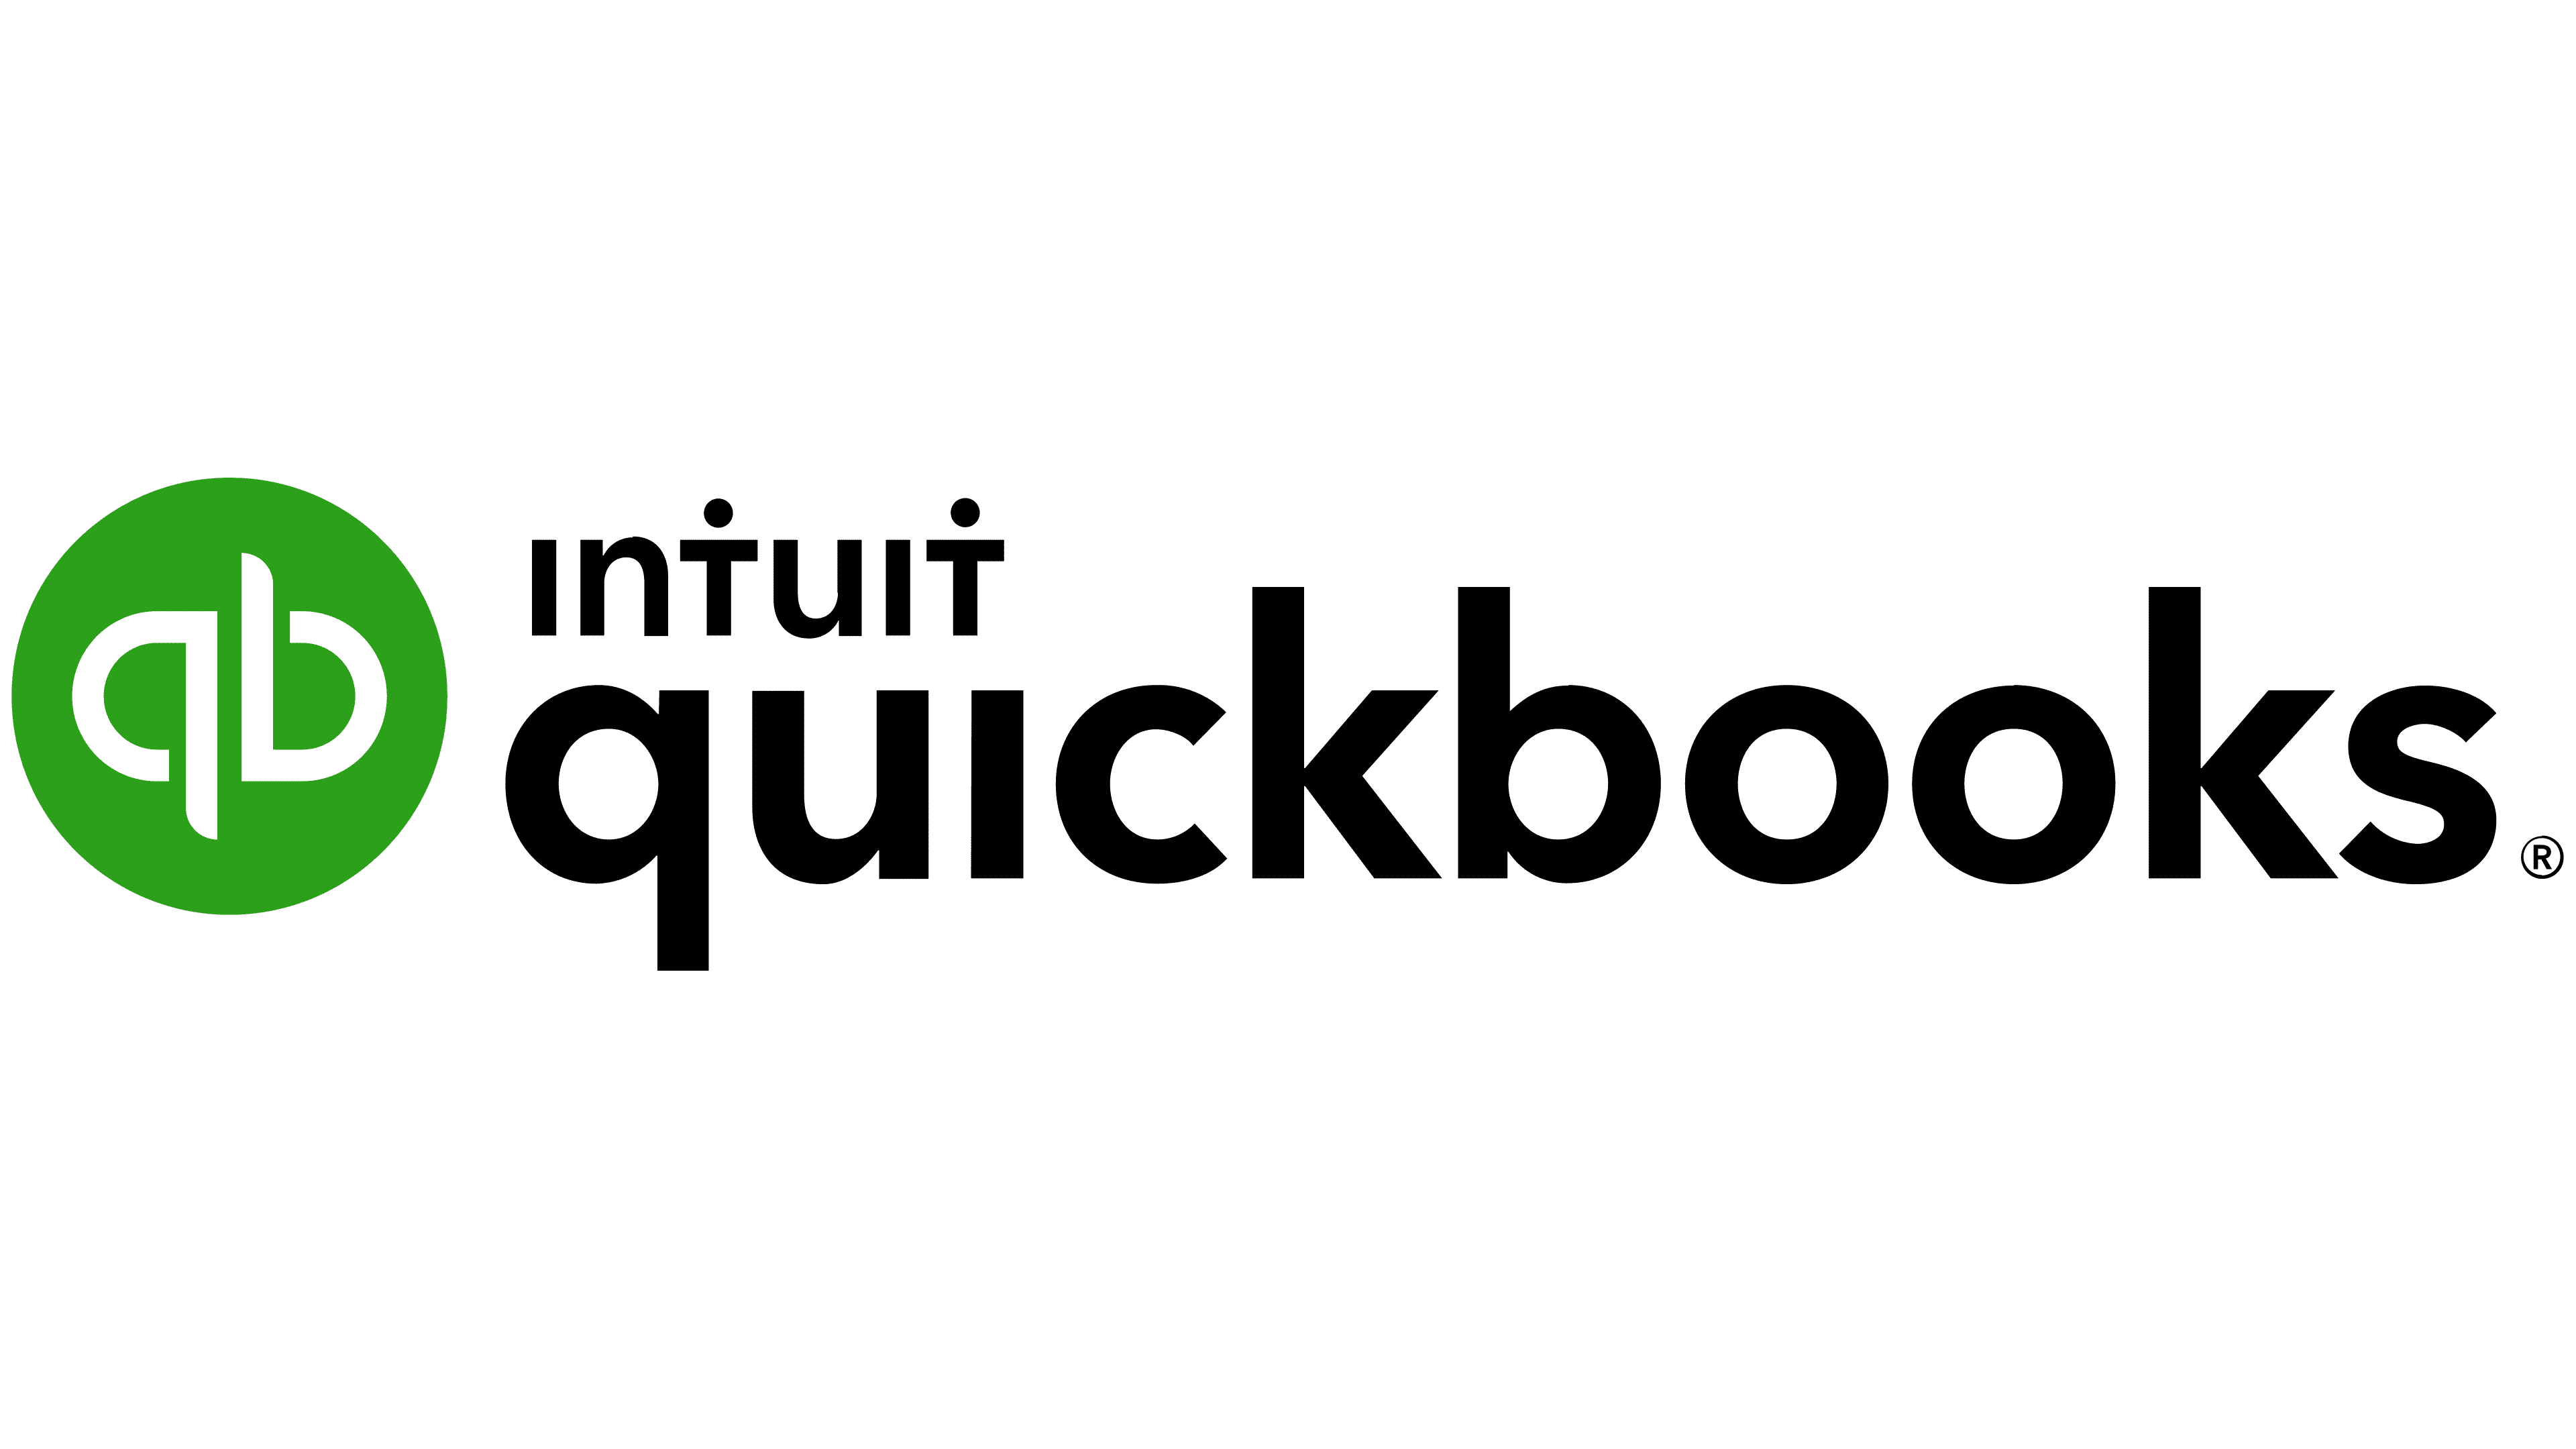 Quickbooks is one of the most prevalent software platforms used across all accounting jobs